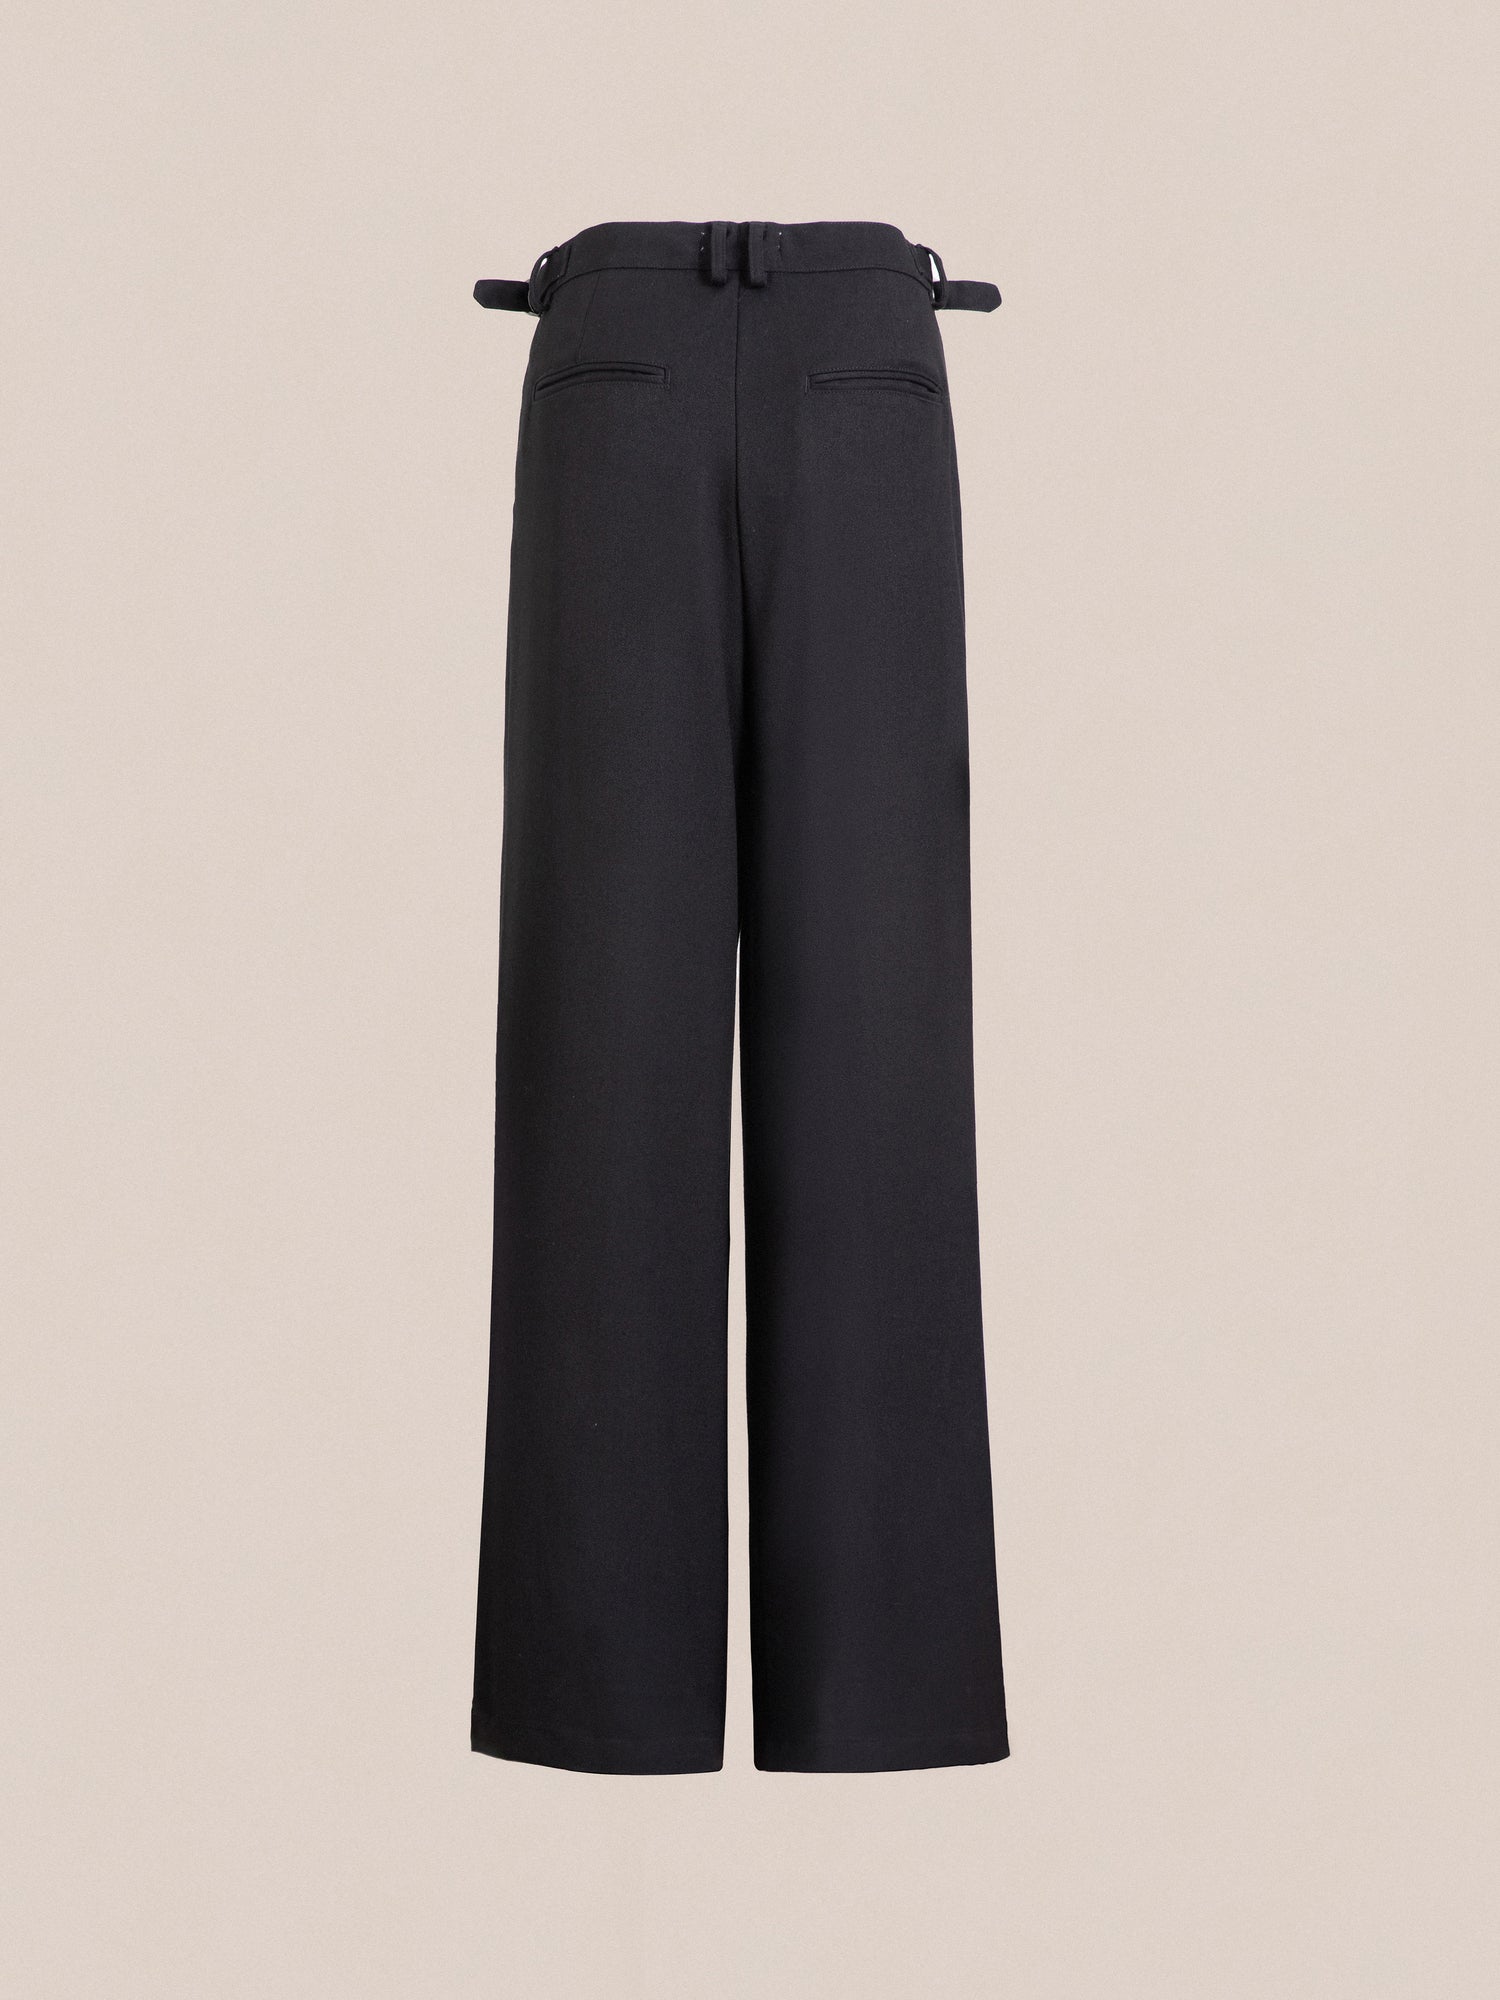 Found Pleated Trousers with an adjustable waist tabs.